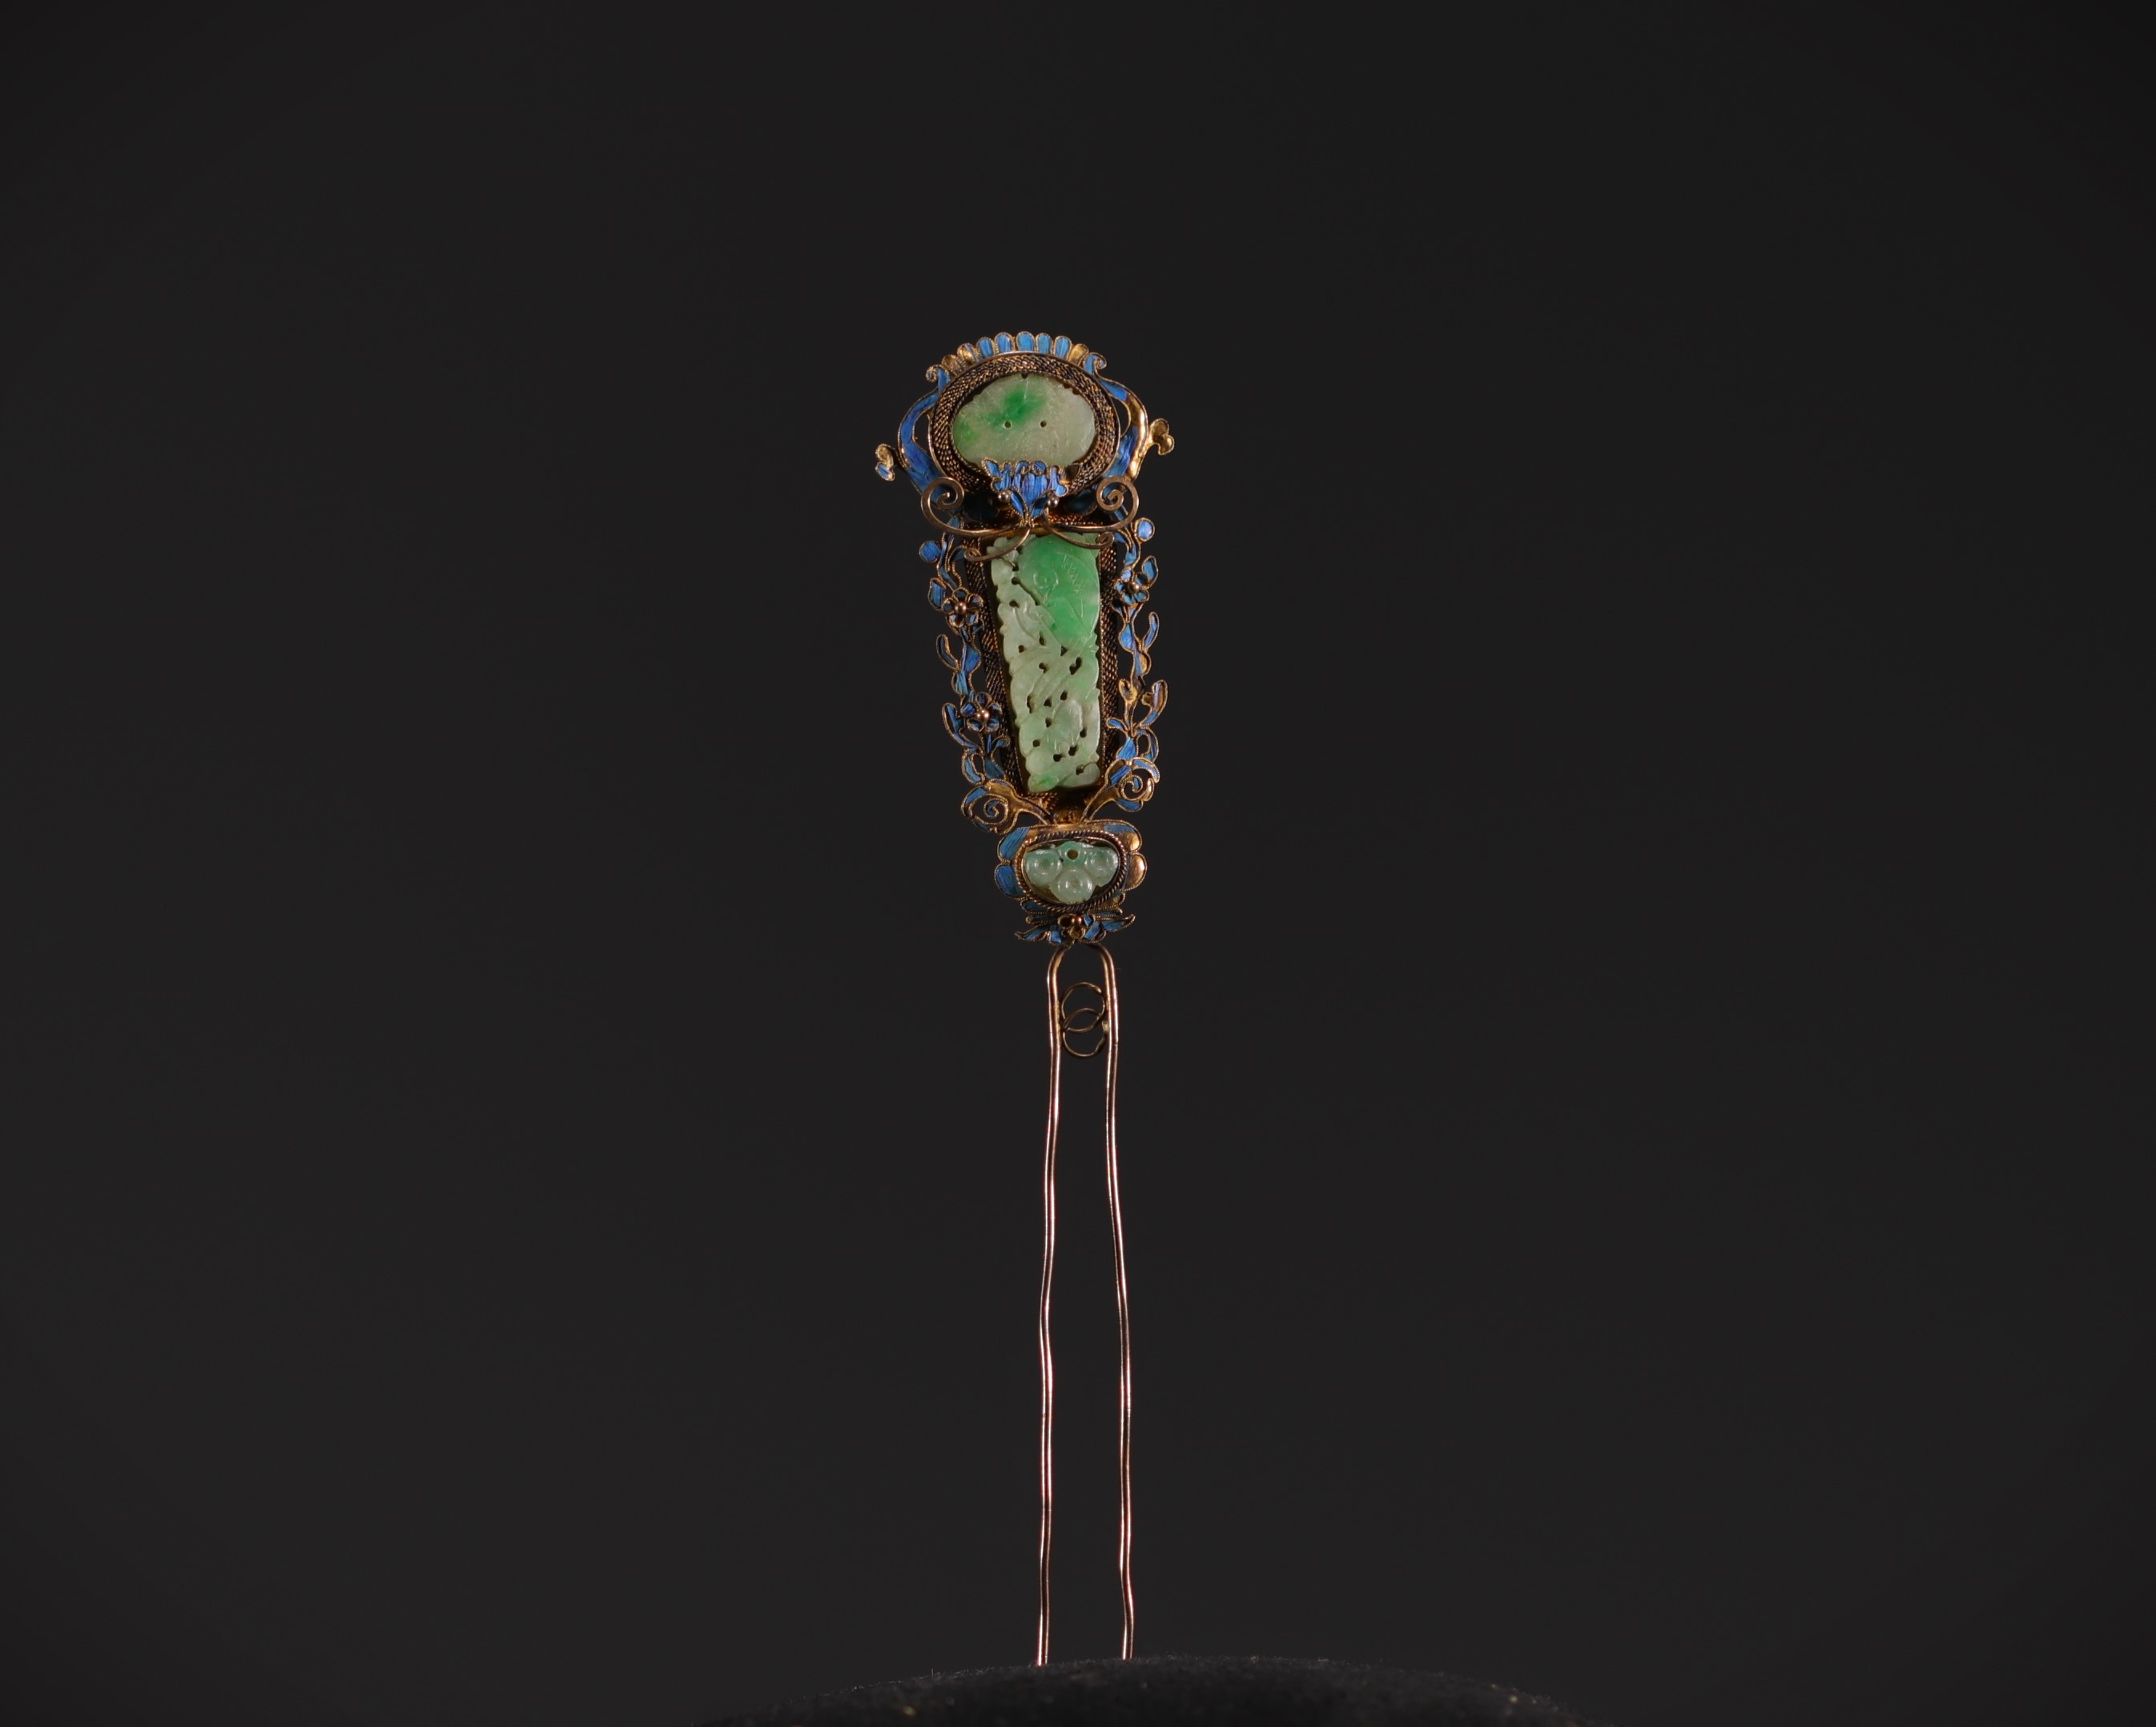 China - Cloisonne enamel and green jade hairpin with feather design, Qing period. - Image 2 of 3